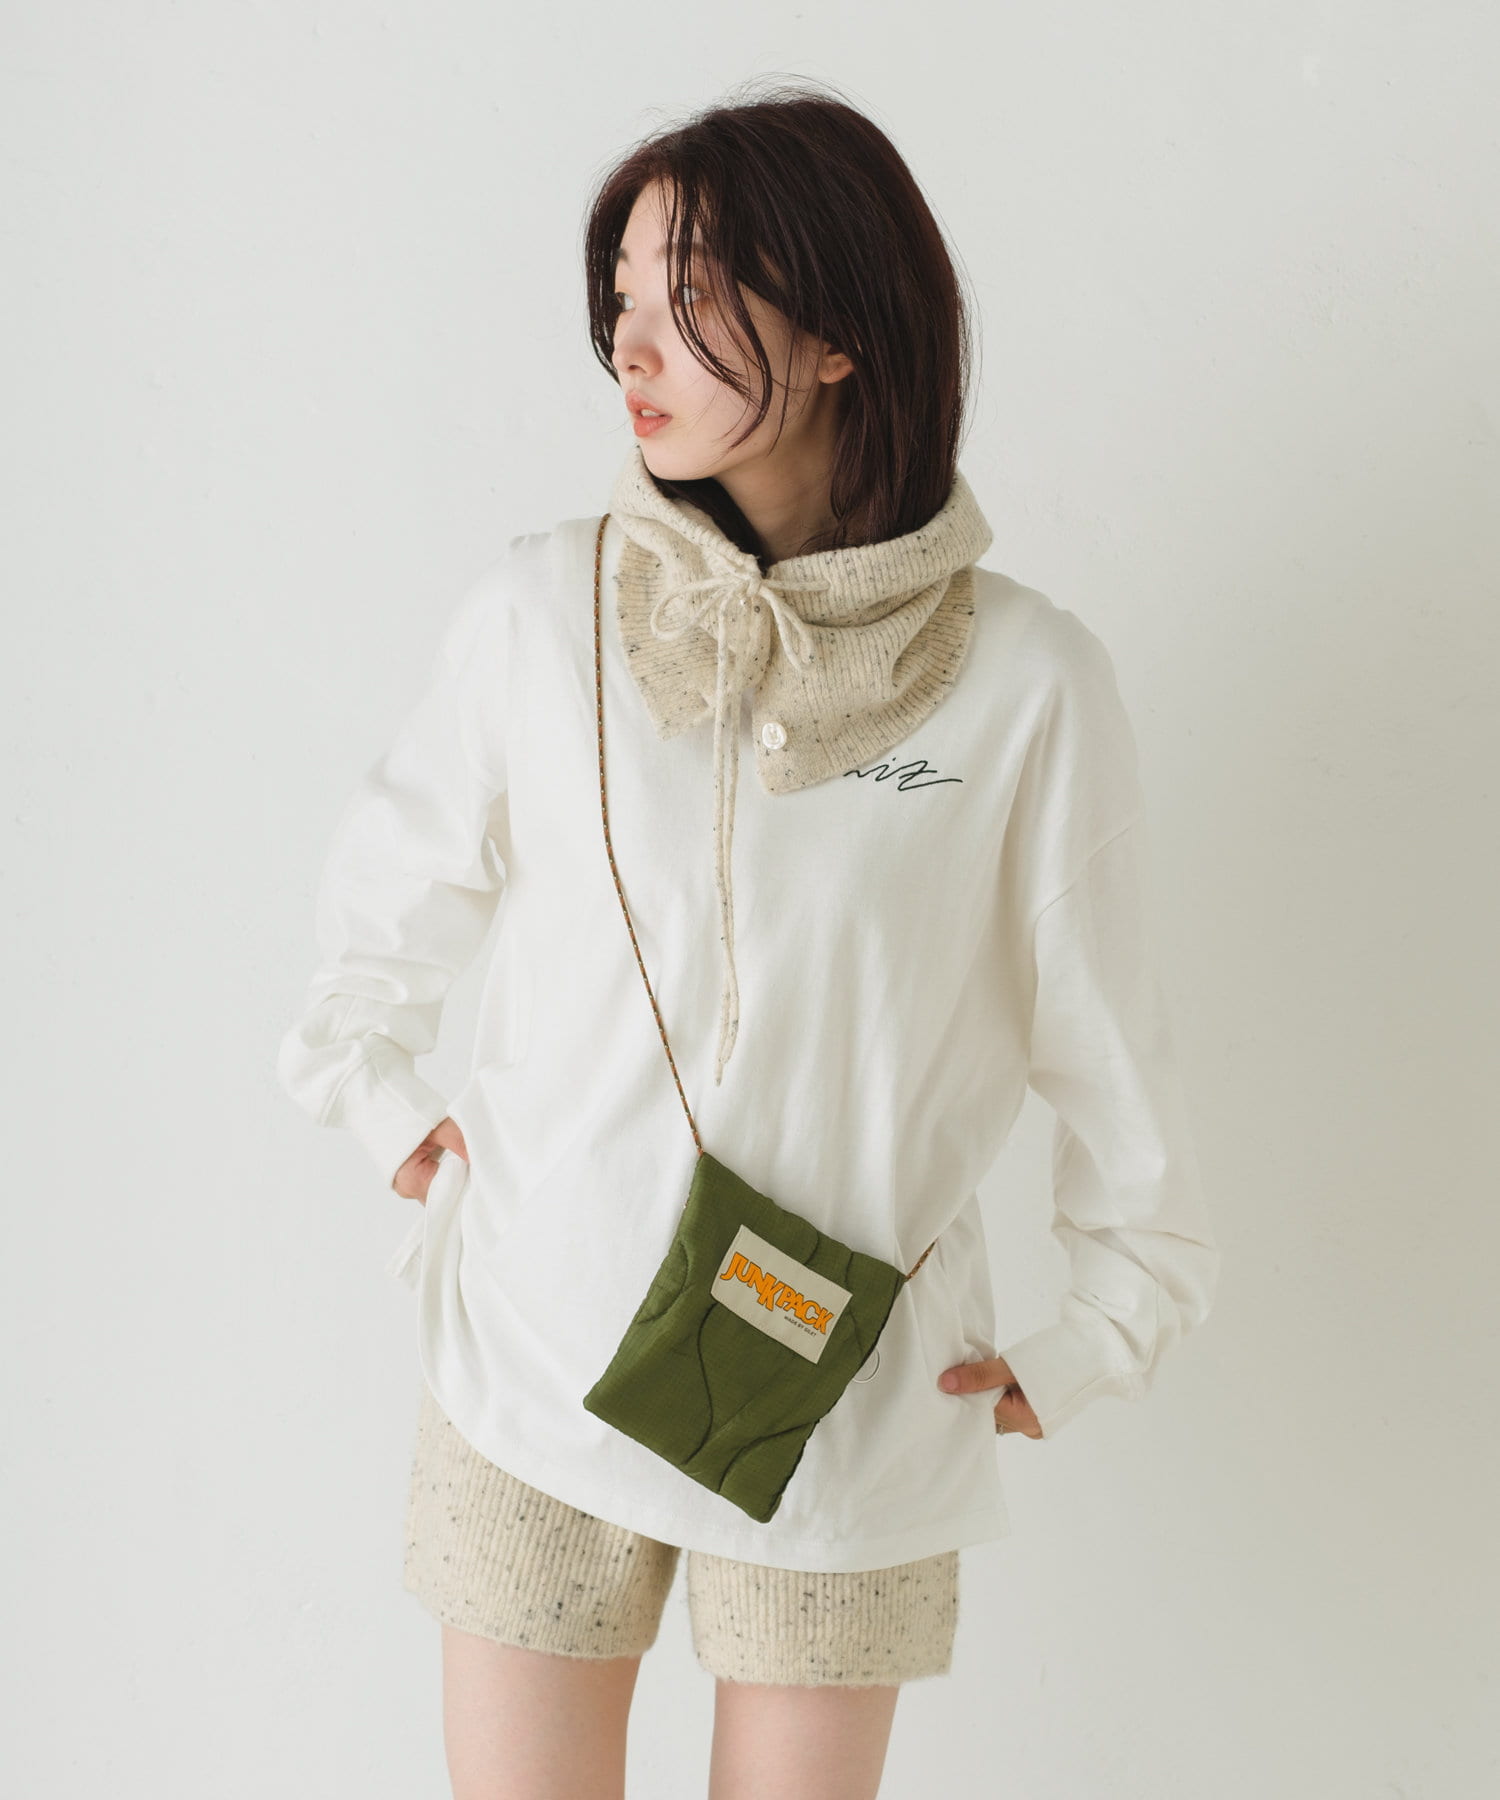 JUNKPACK×WHIMSIC QUILTING SACOCHE